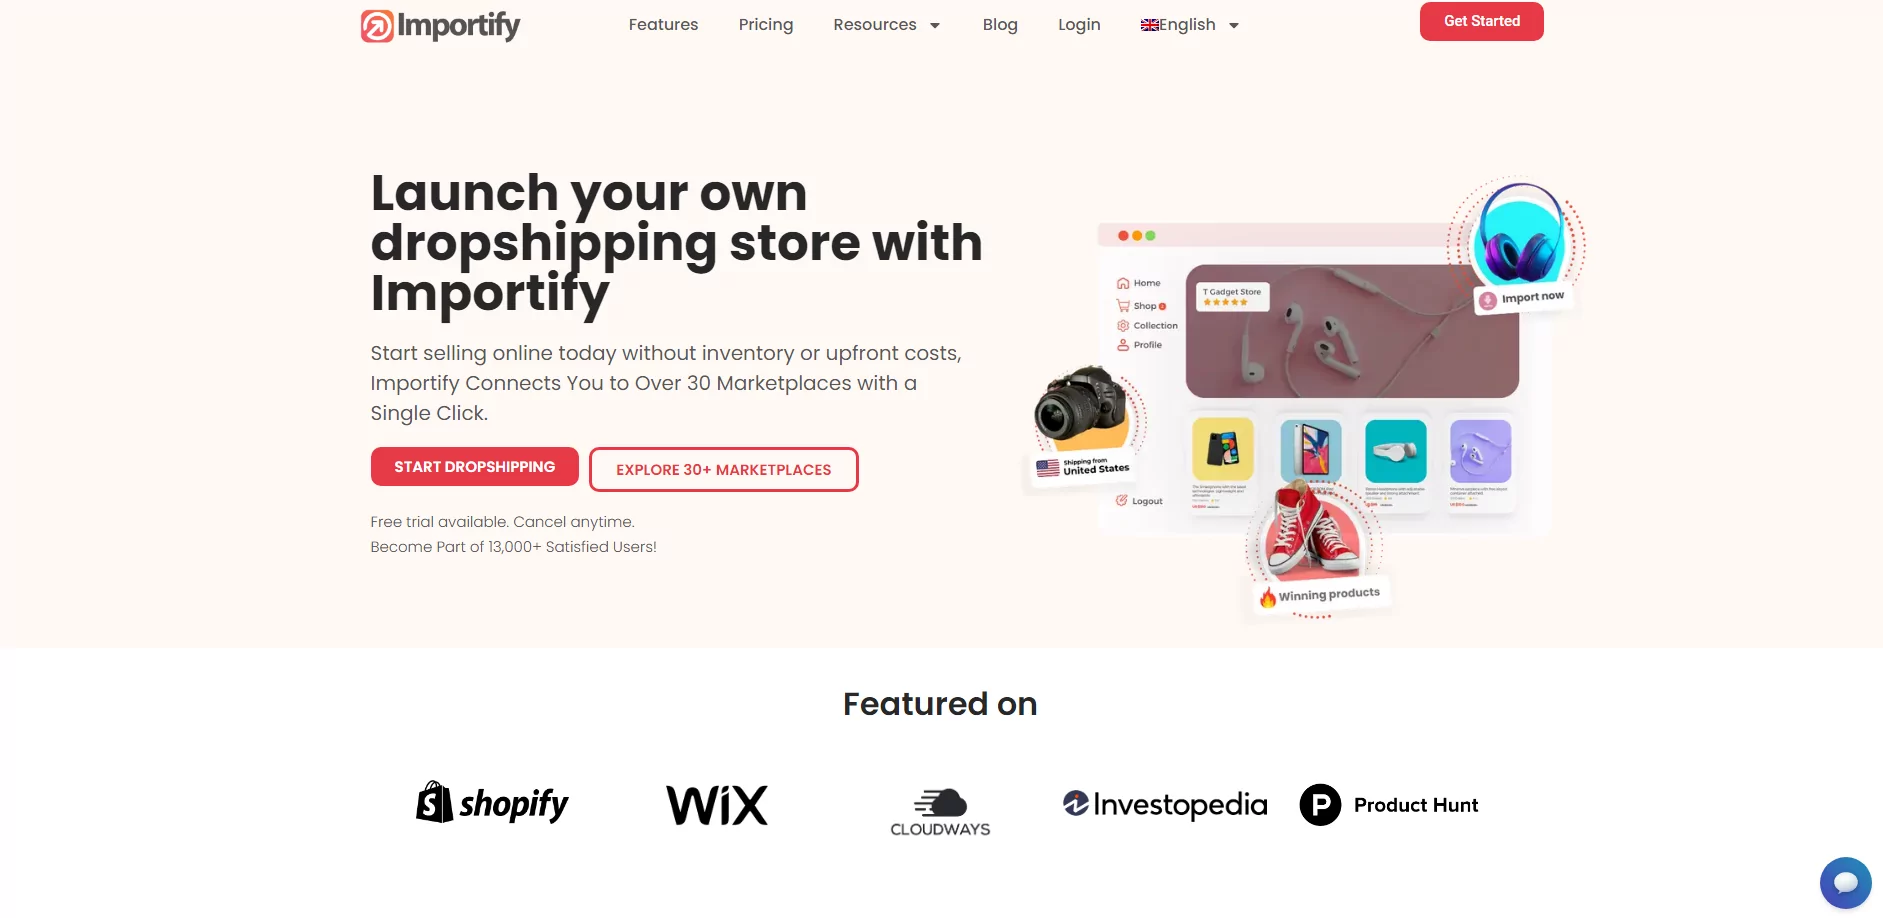 Best Toys Dropshipping Suppliers 7: Importify